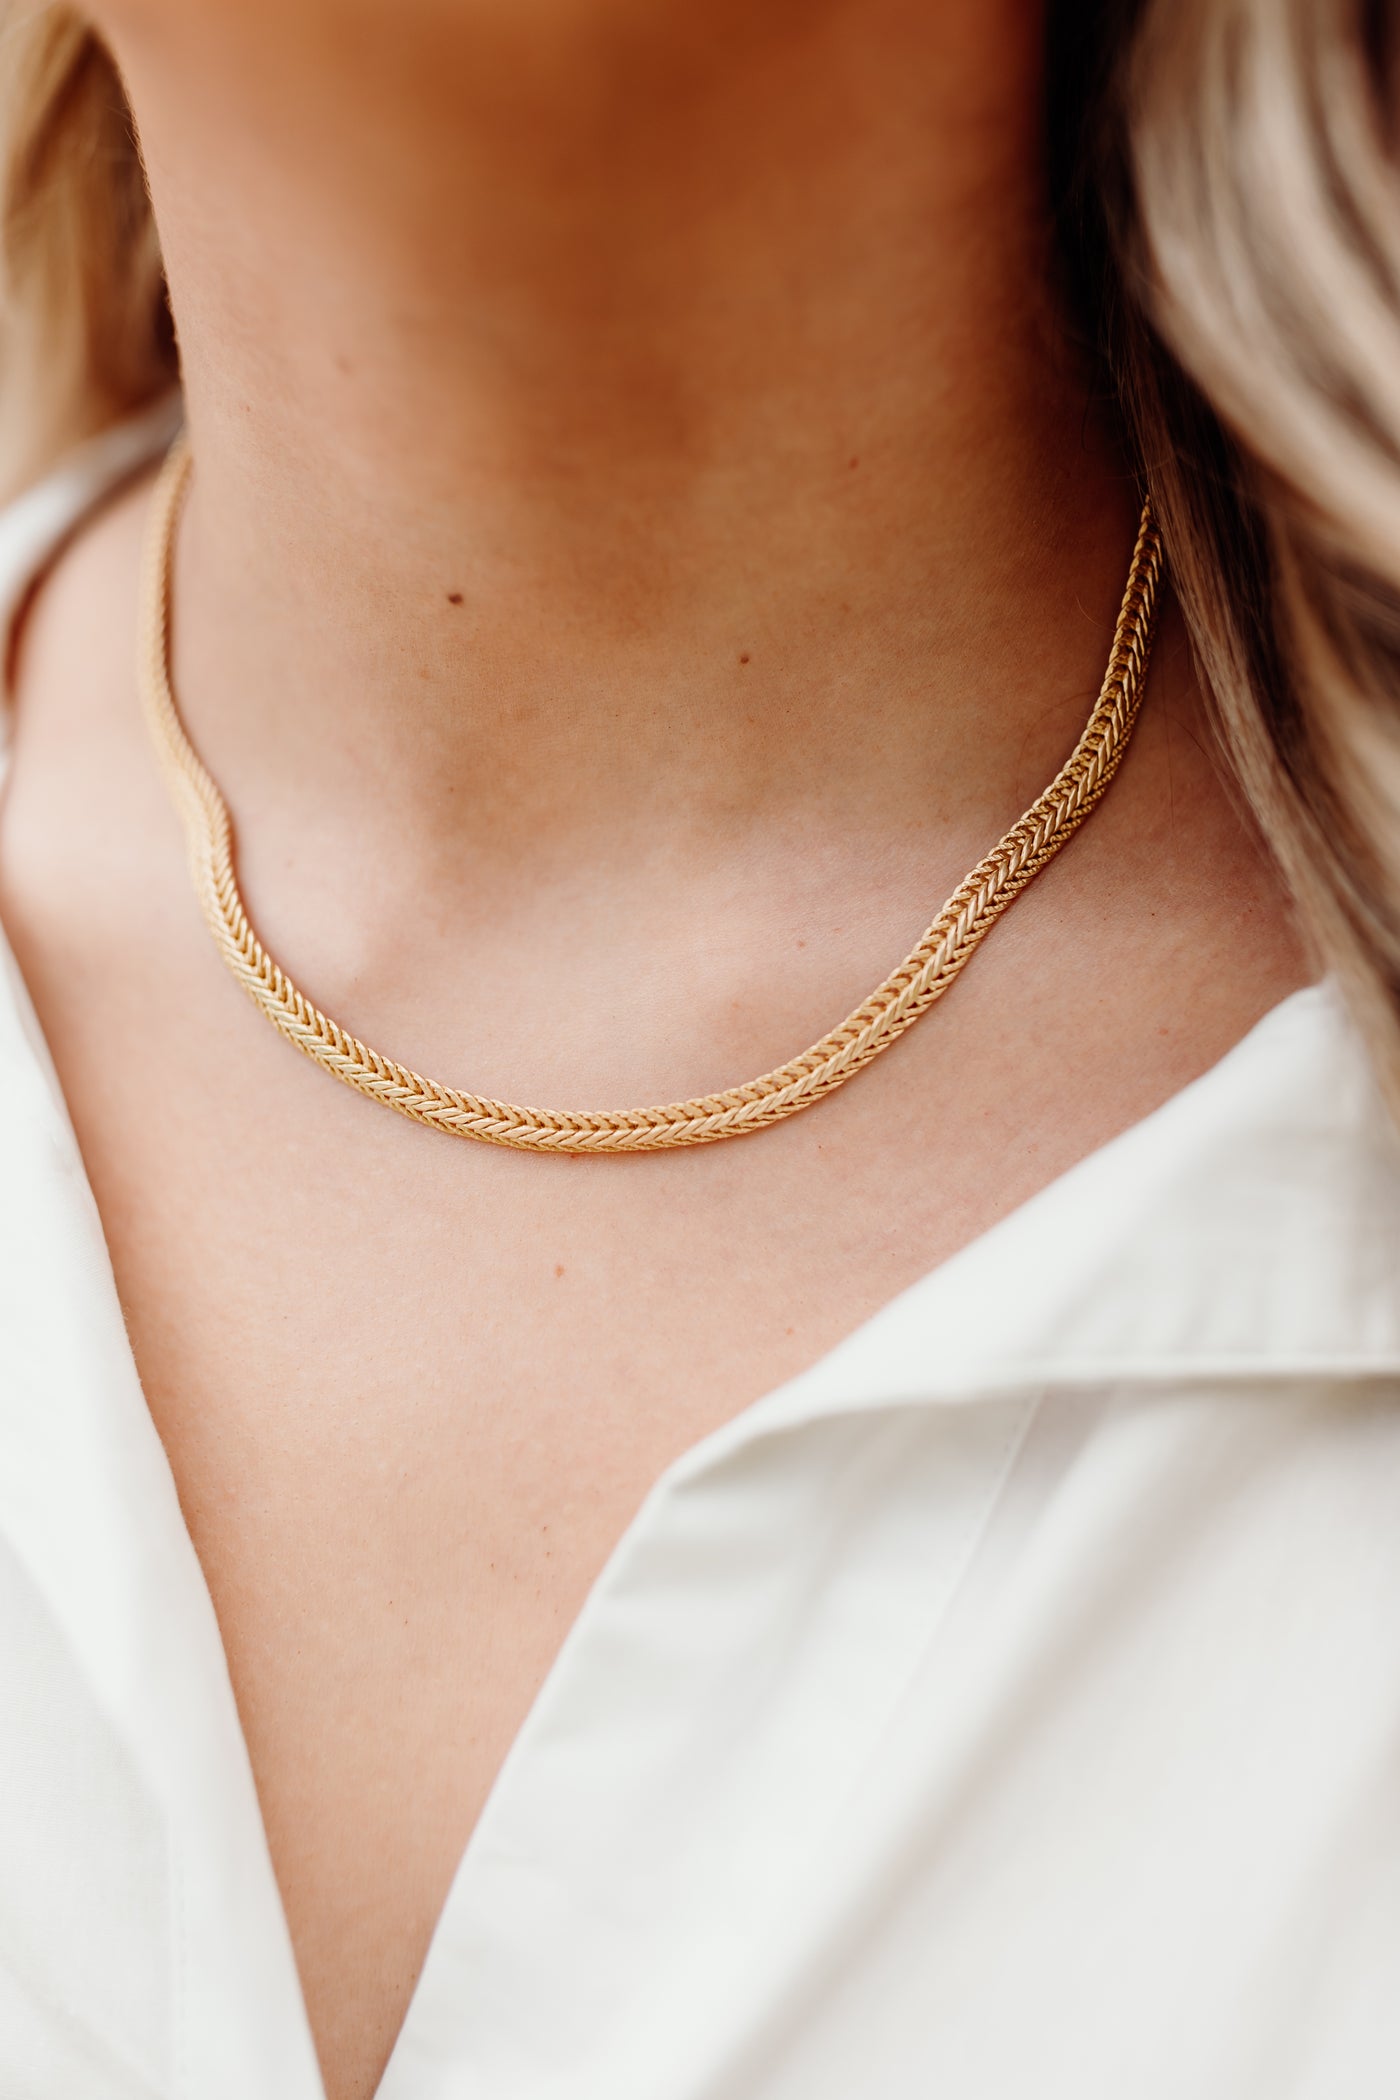 Virtue Jewelry Gold Double Flat Woven Chain Necklace